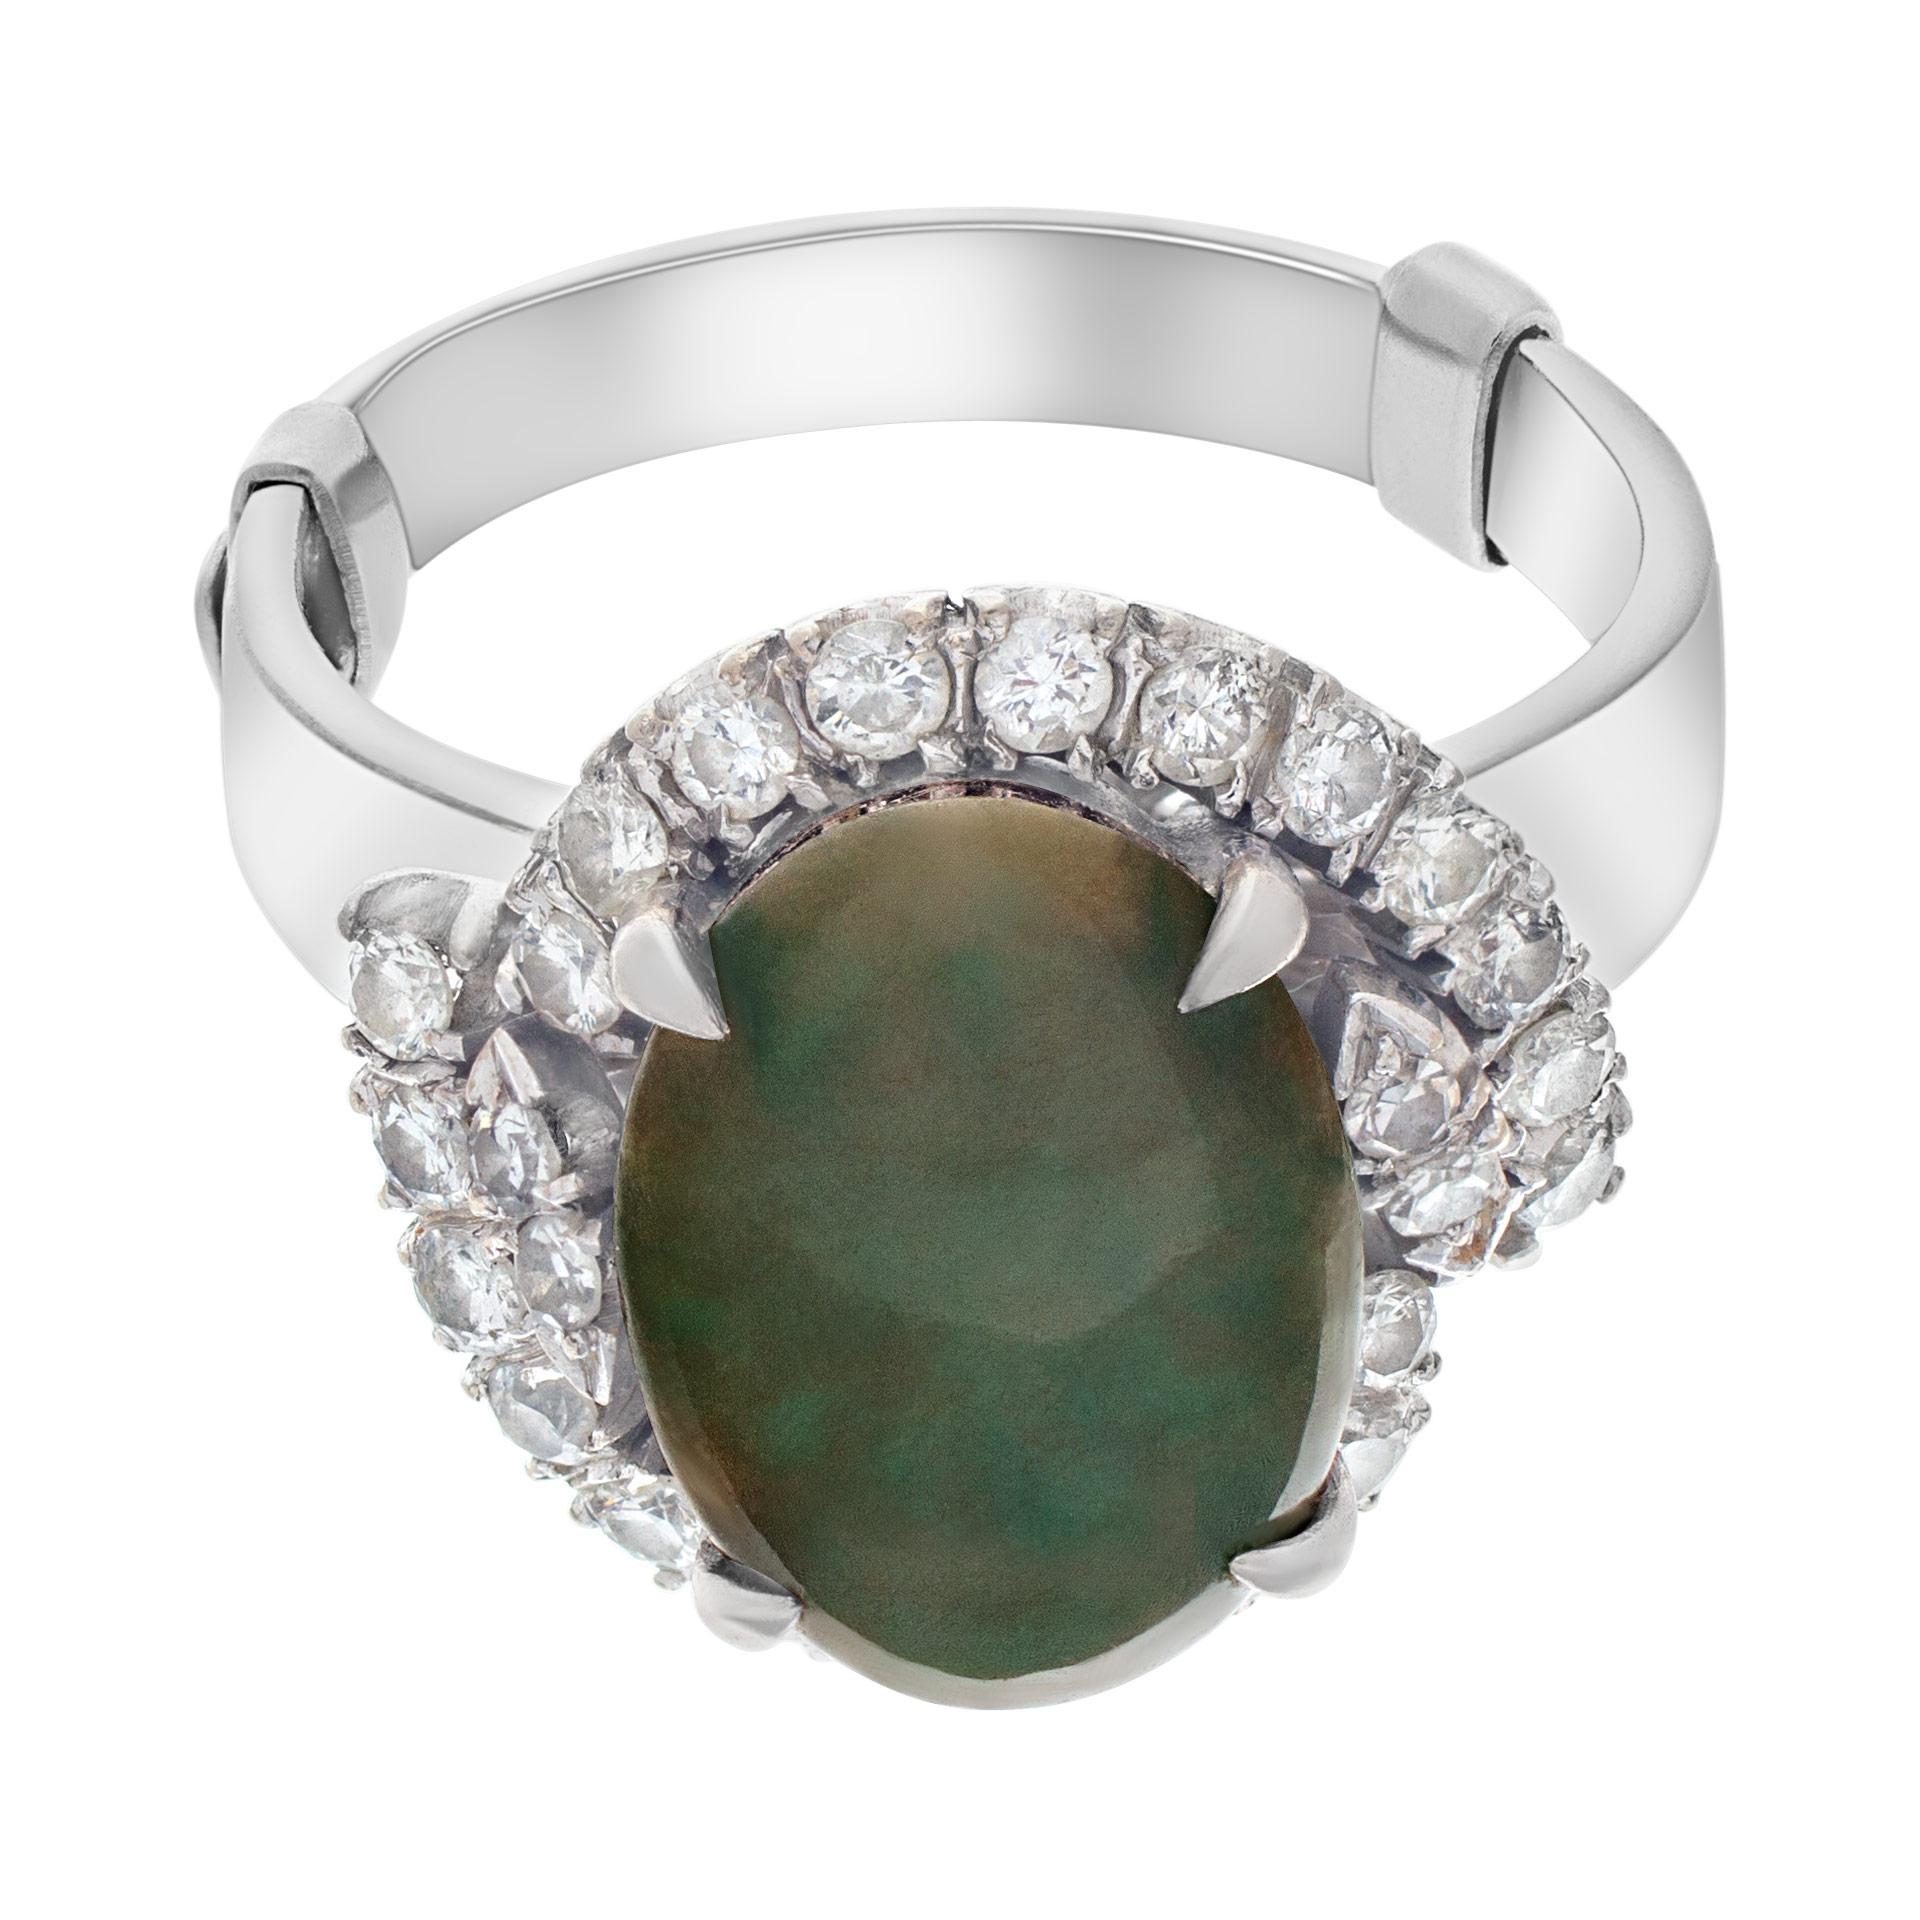 ESTIMATED RETAIL: $2,880 YOUR PRICE: $1,800 - Vintage Jade ring in 14k white gold with approximately 0.50 cts in round diamonds. Size 7.5.

